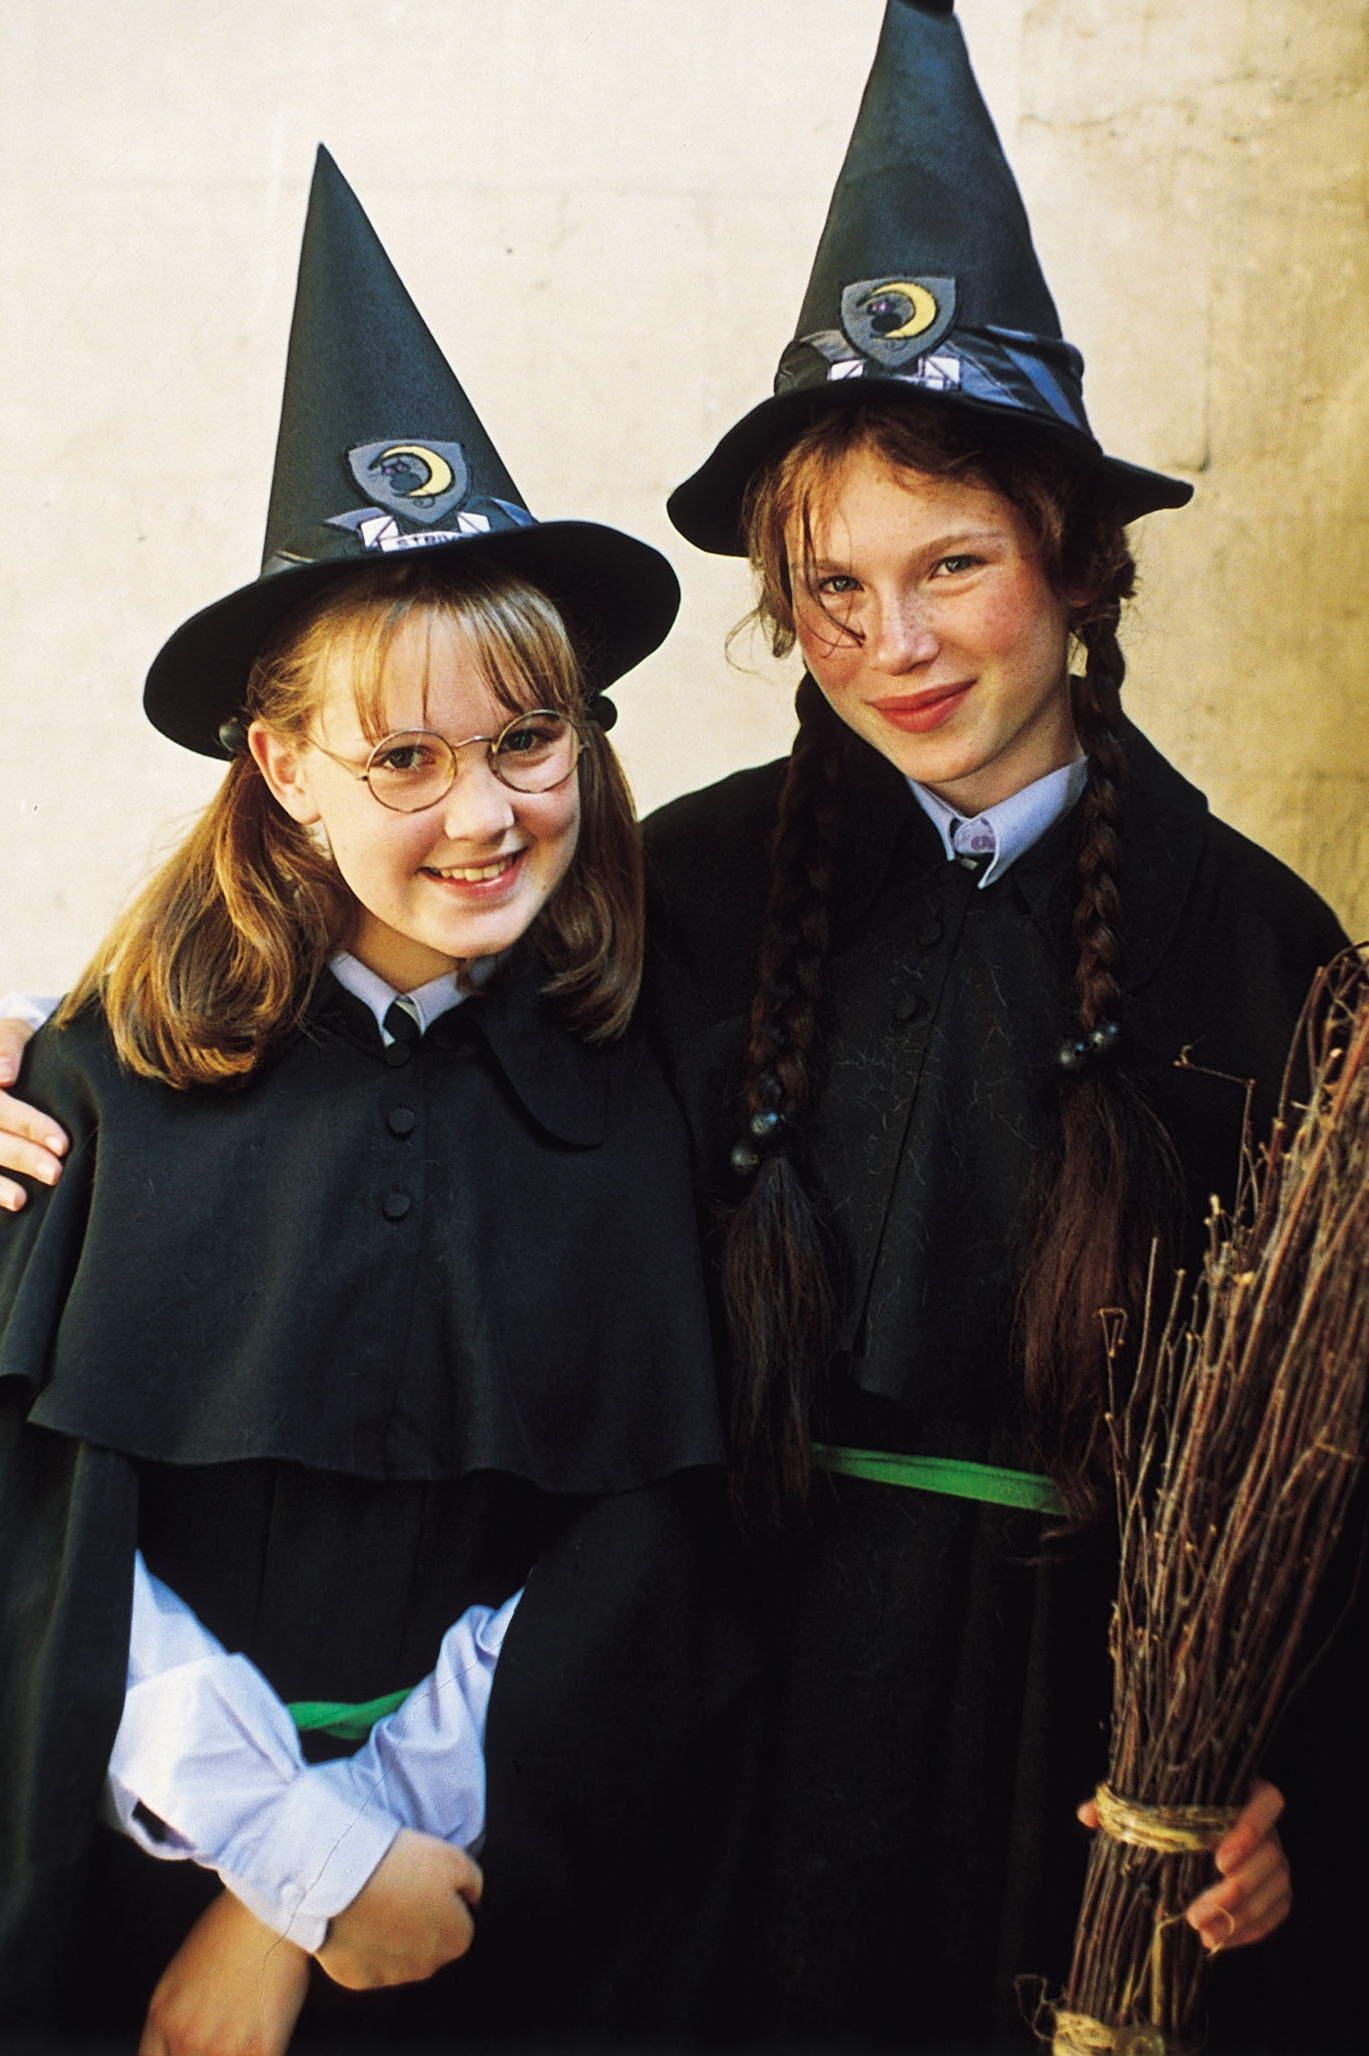 Mildred Hubble. The worst witch, Witch tv series, Halloween